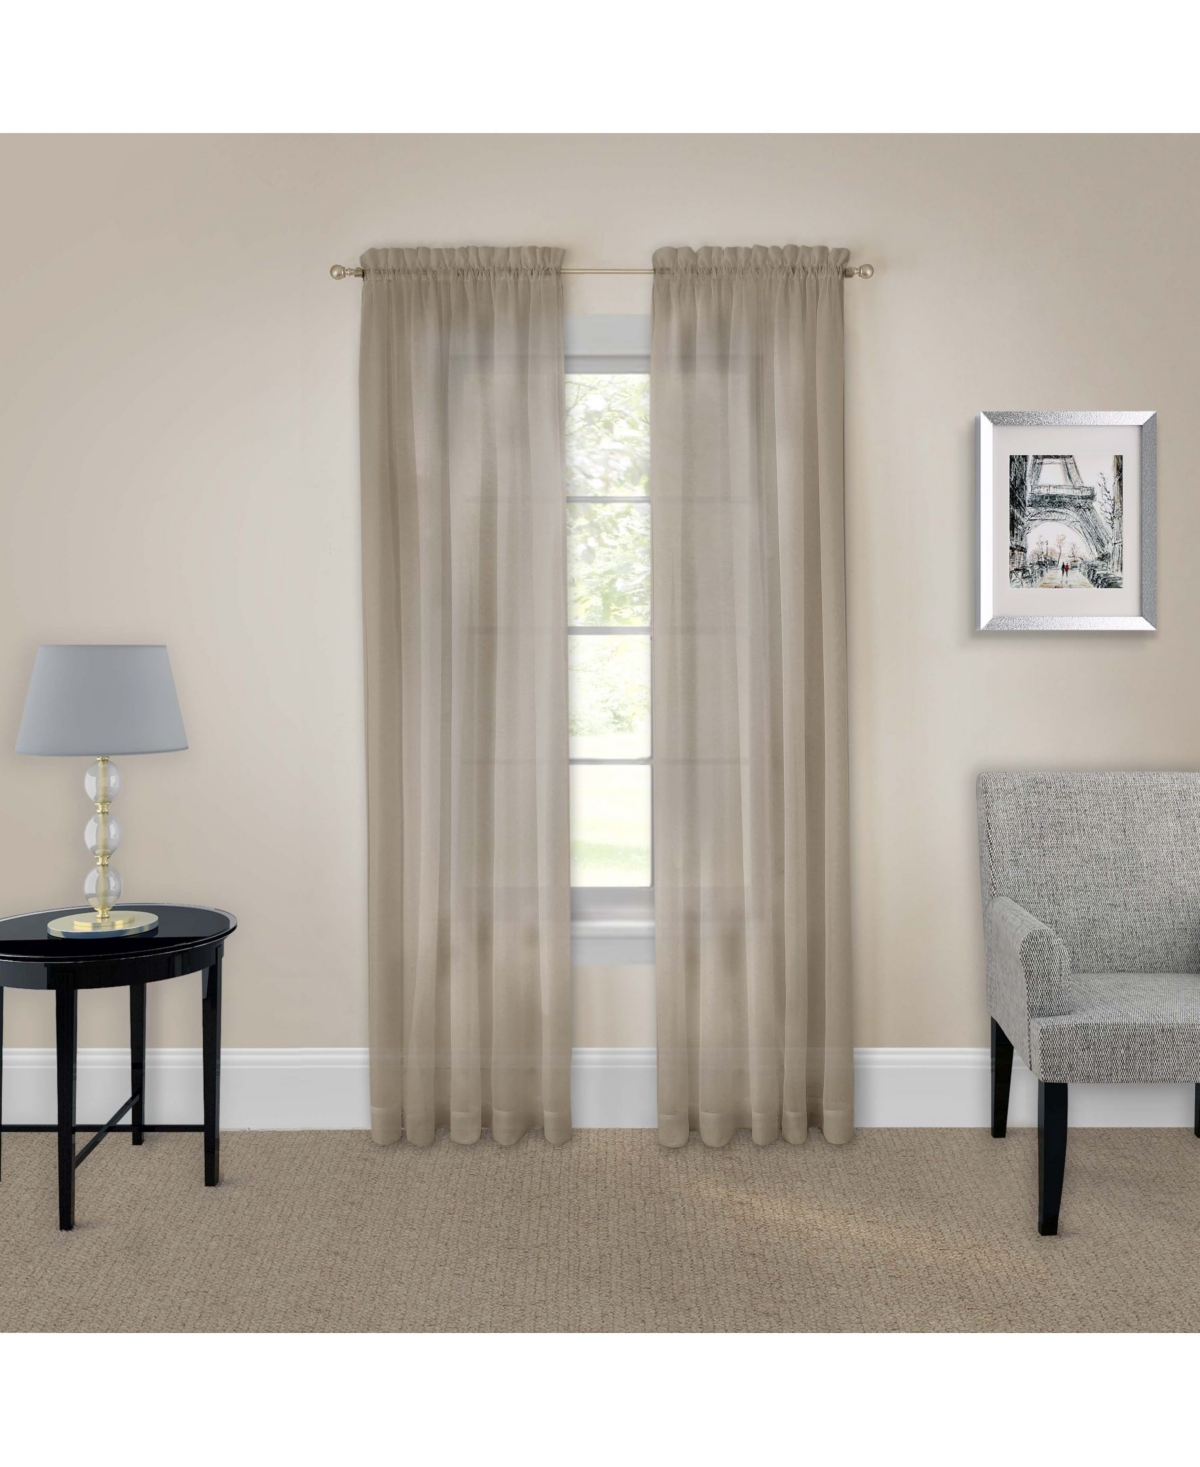 Eclipse Pairs To Go Victoria Voile 63" X 118" Curtain Panel, Set Of 2 In Taupe